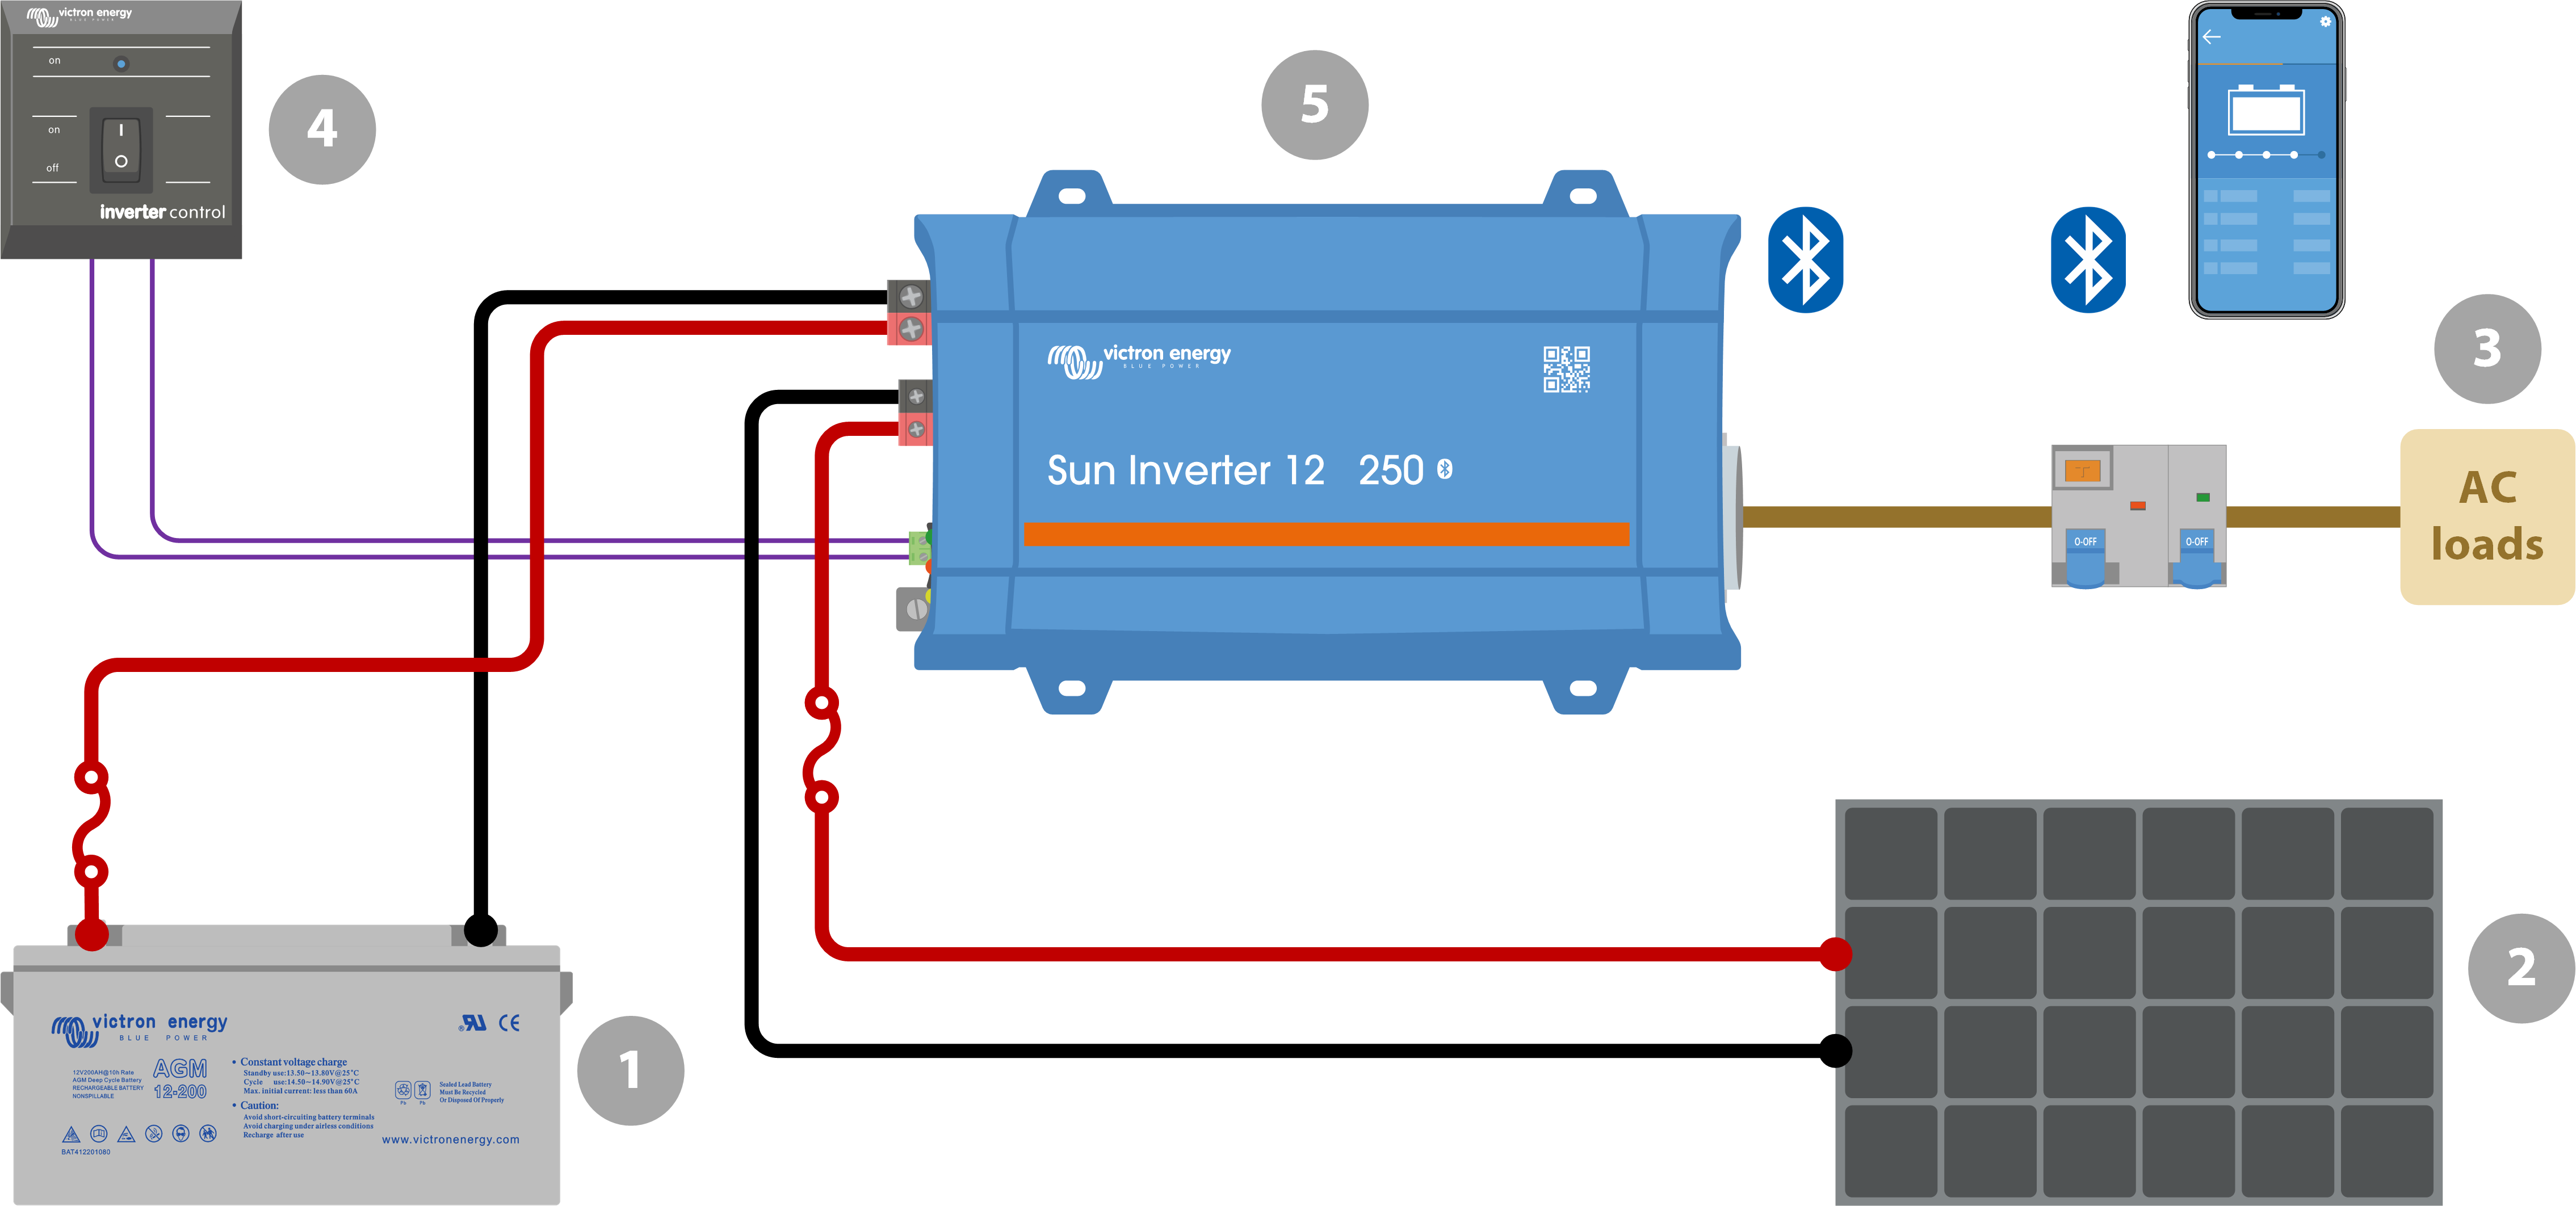 System_-_Inverter_SUN_and_inverter_control_panel.png